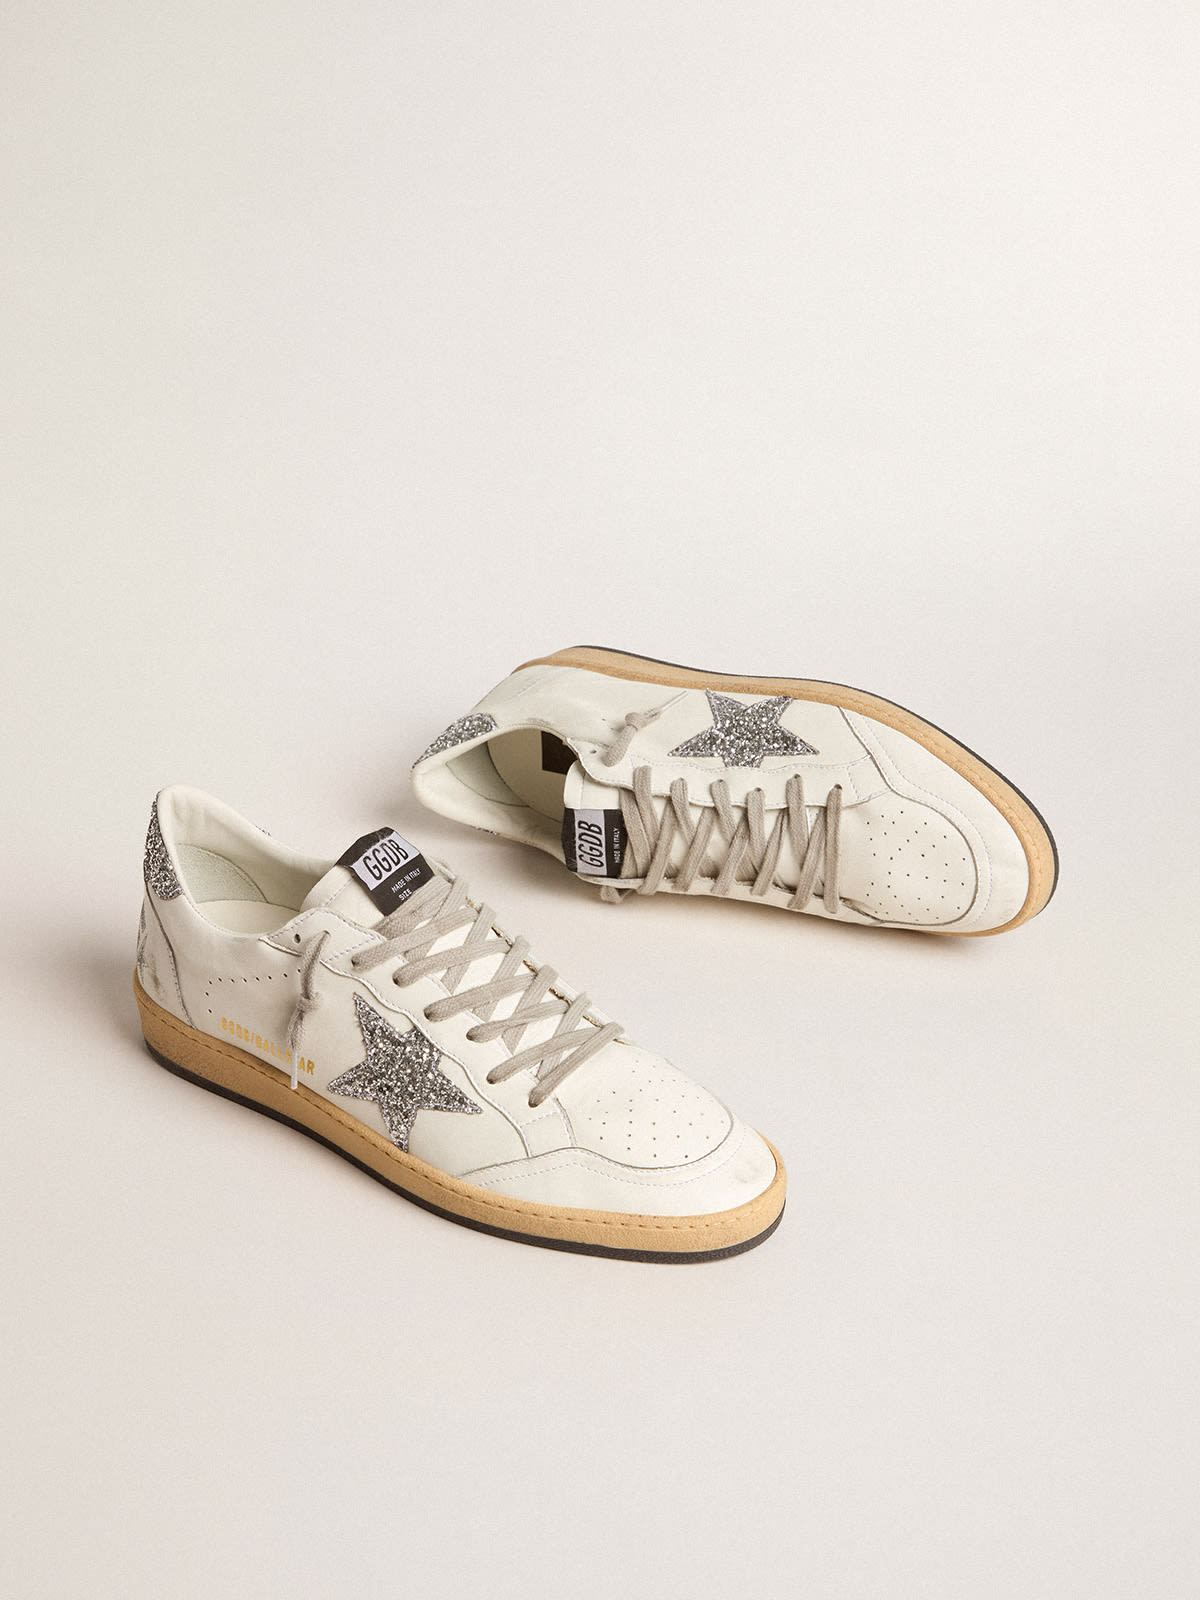 Golden Goose - Women’s Ball Star Wishes in nappa leather with white star and glitter heel tab in 